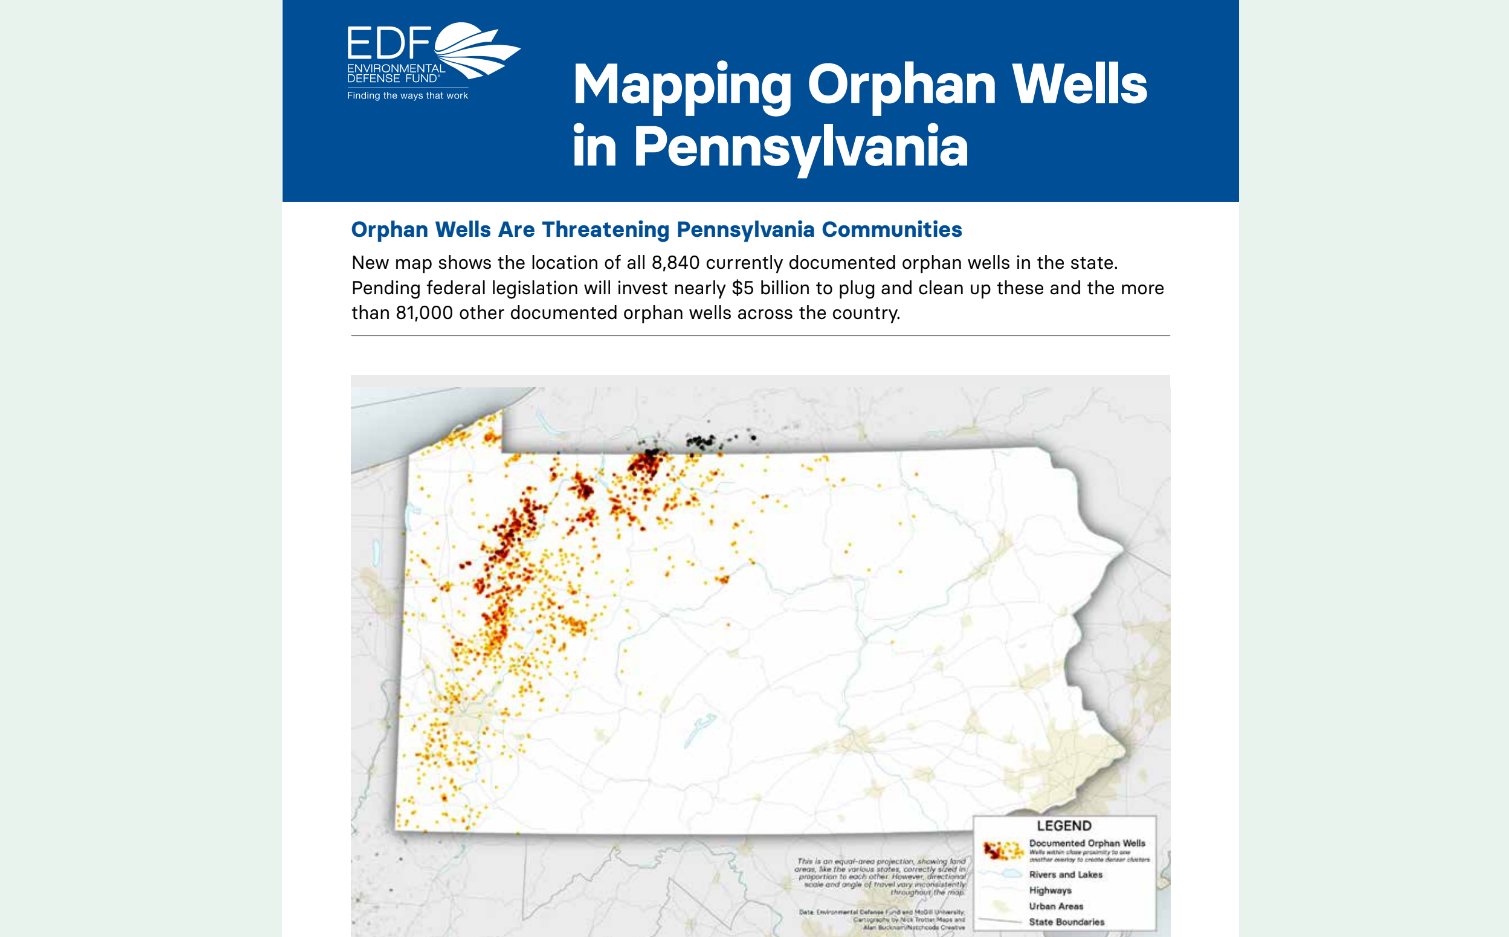 Environmental Defense Fund - Mapping Orphan Wells in Pennsylvania